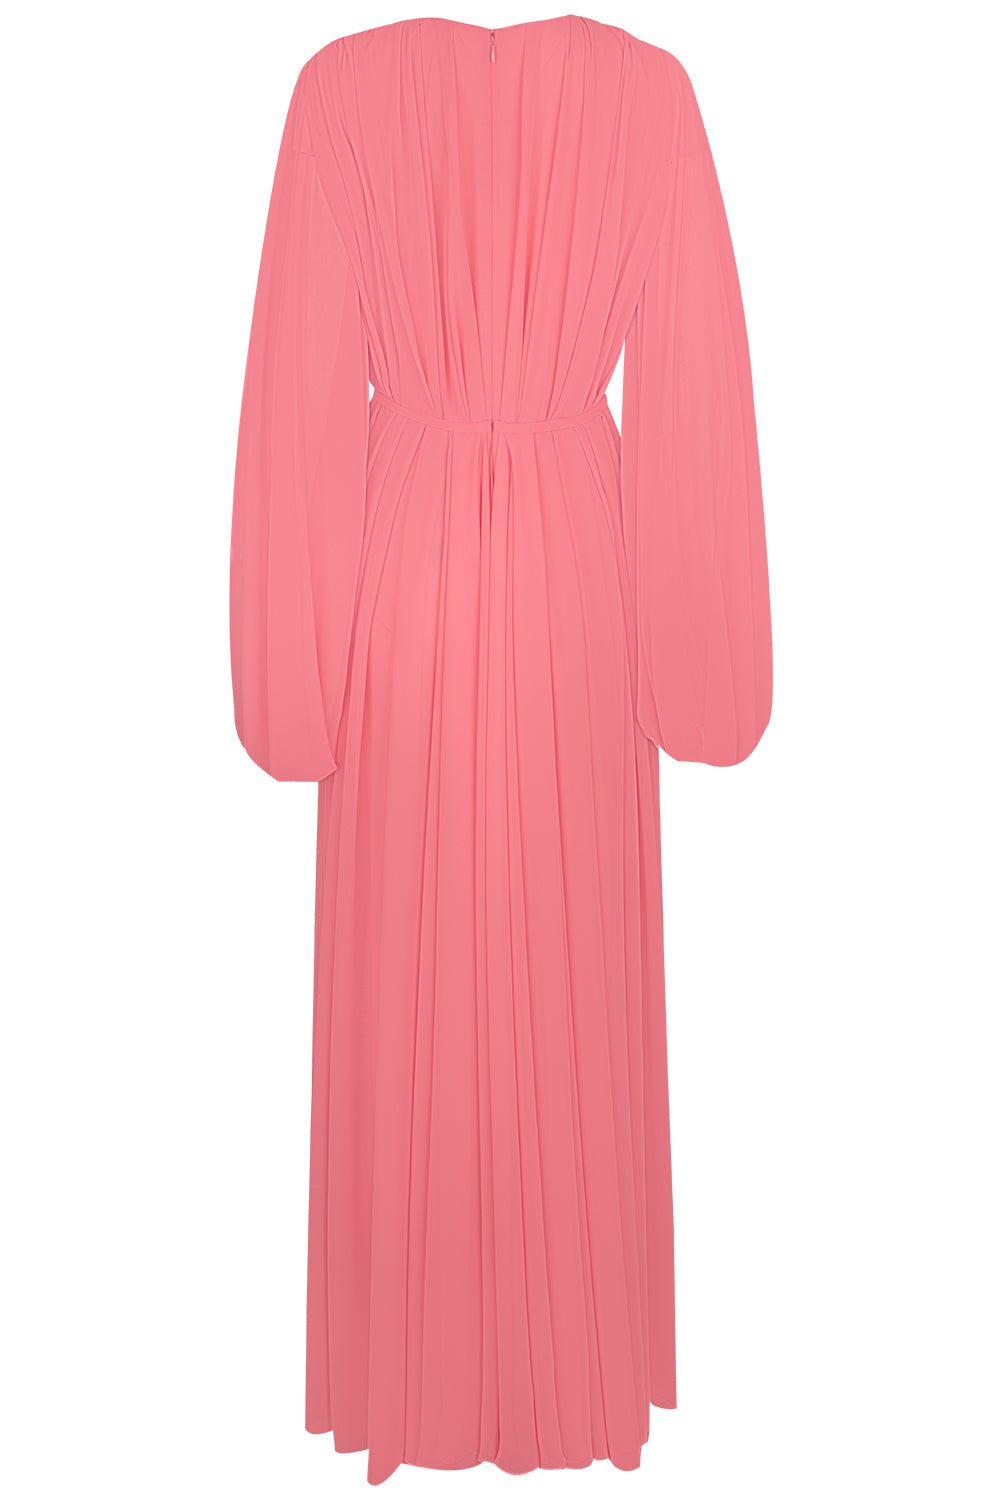 Bubble Sleeve Gown - Stawberry CLOTHINGDRESSGOWN REEM ACRA   